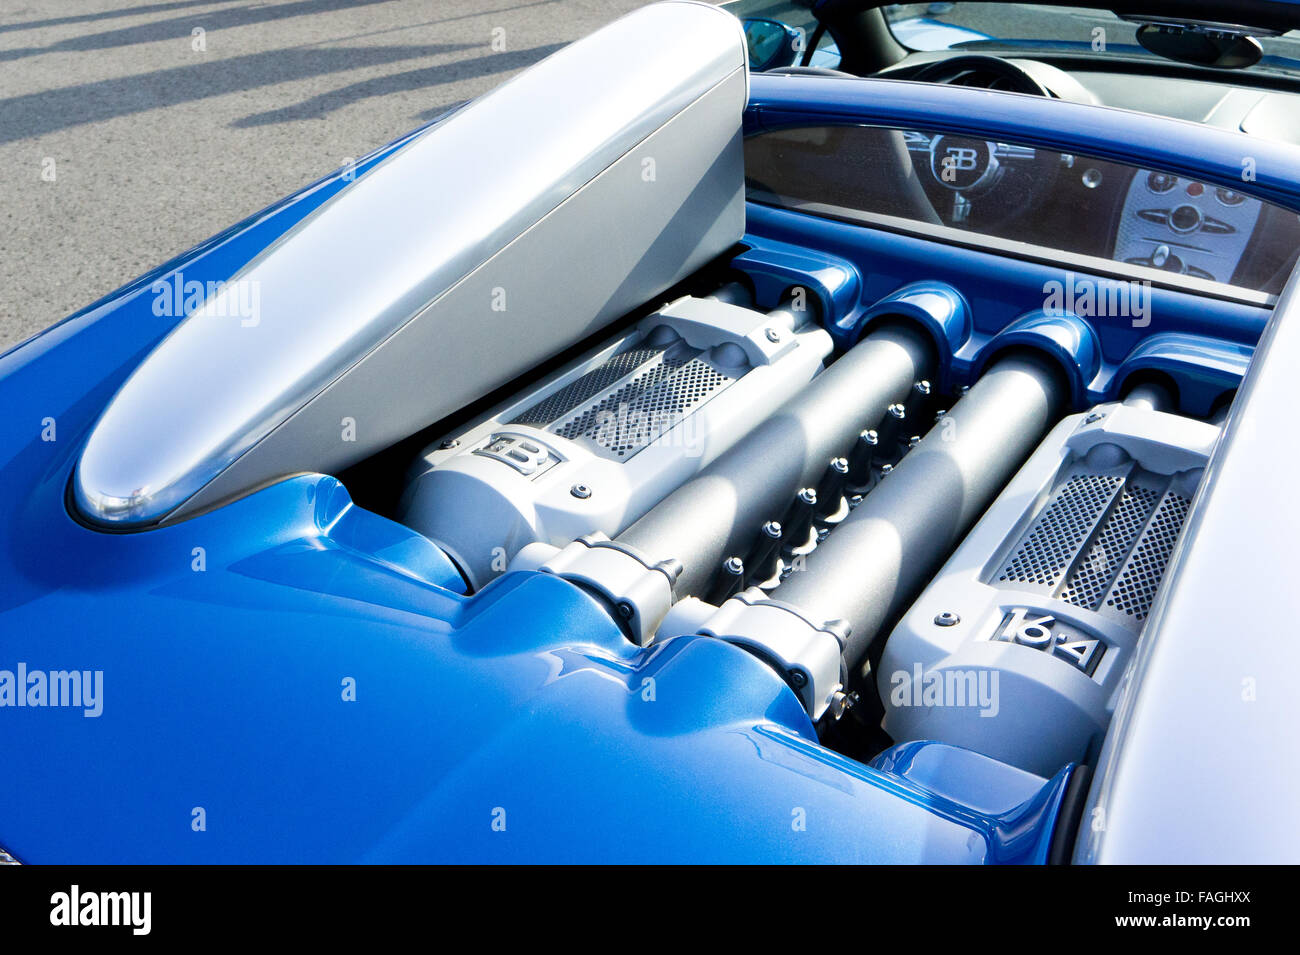 Blue Bugatti W16 engine on race track.This is very high power 1000ps engine. Stock Photo